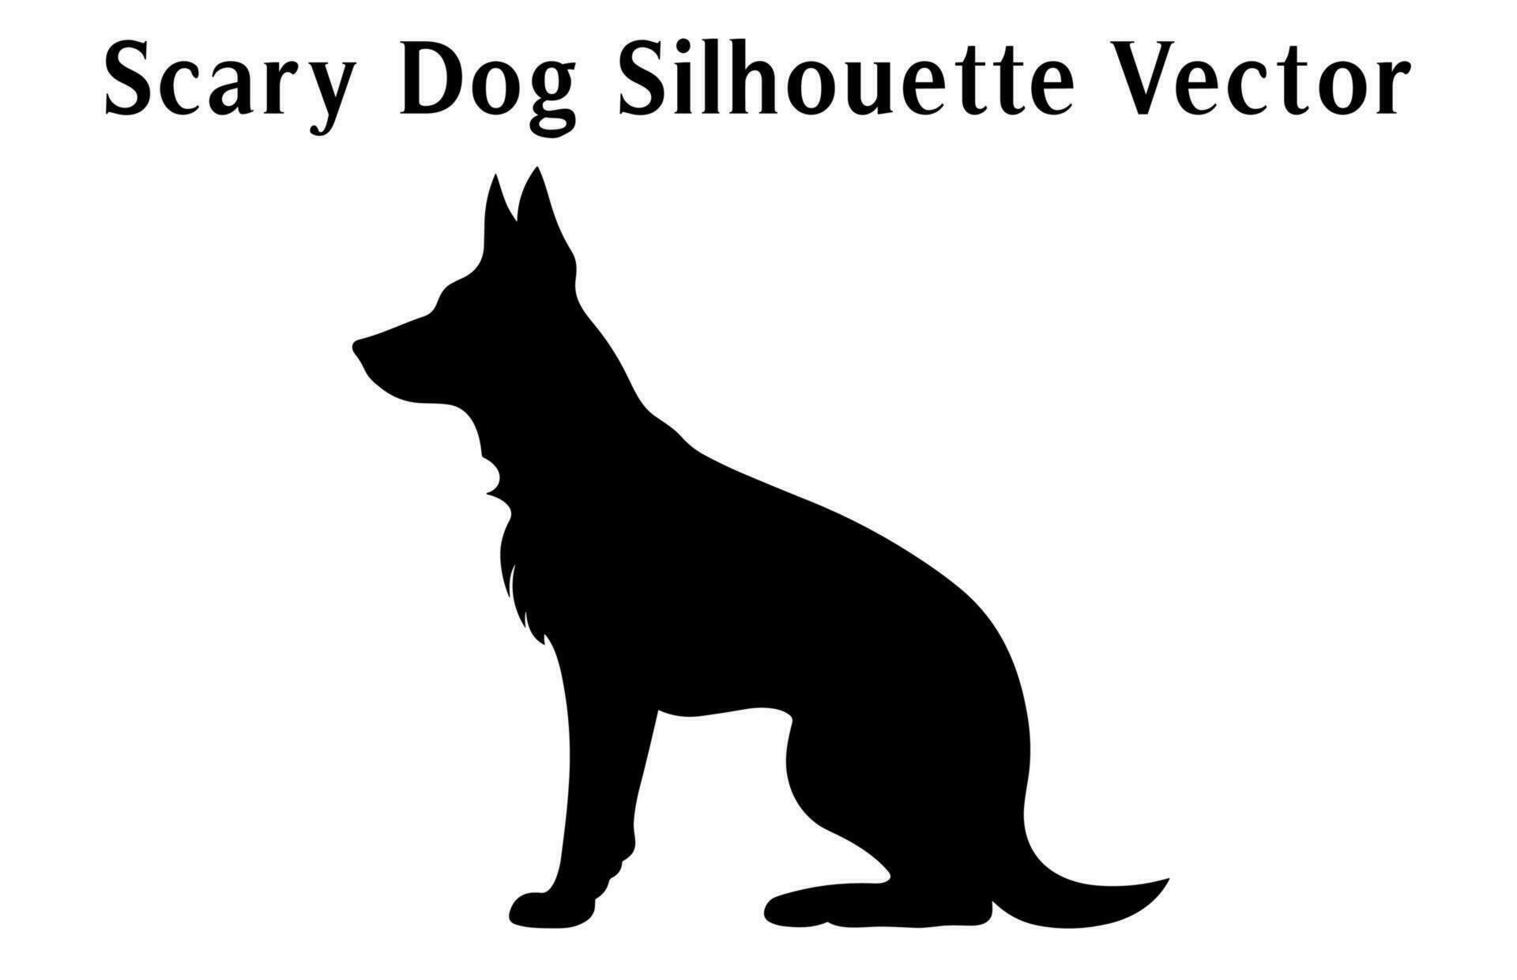 Free Halloween Scary Dog Vector Silhouettes bundle, Set of silhouettes Halloween evil black Dogs